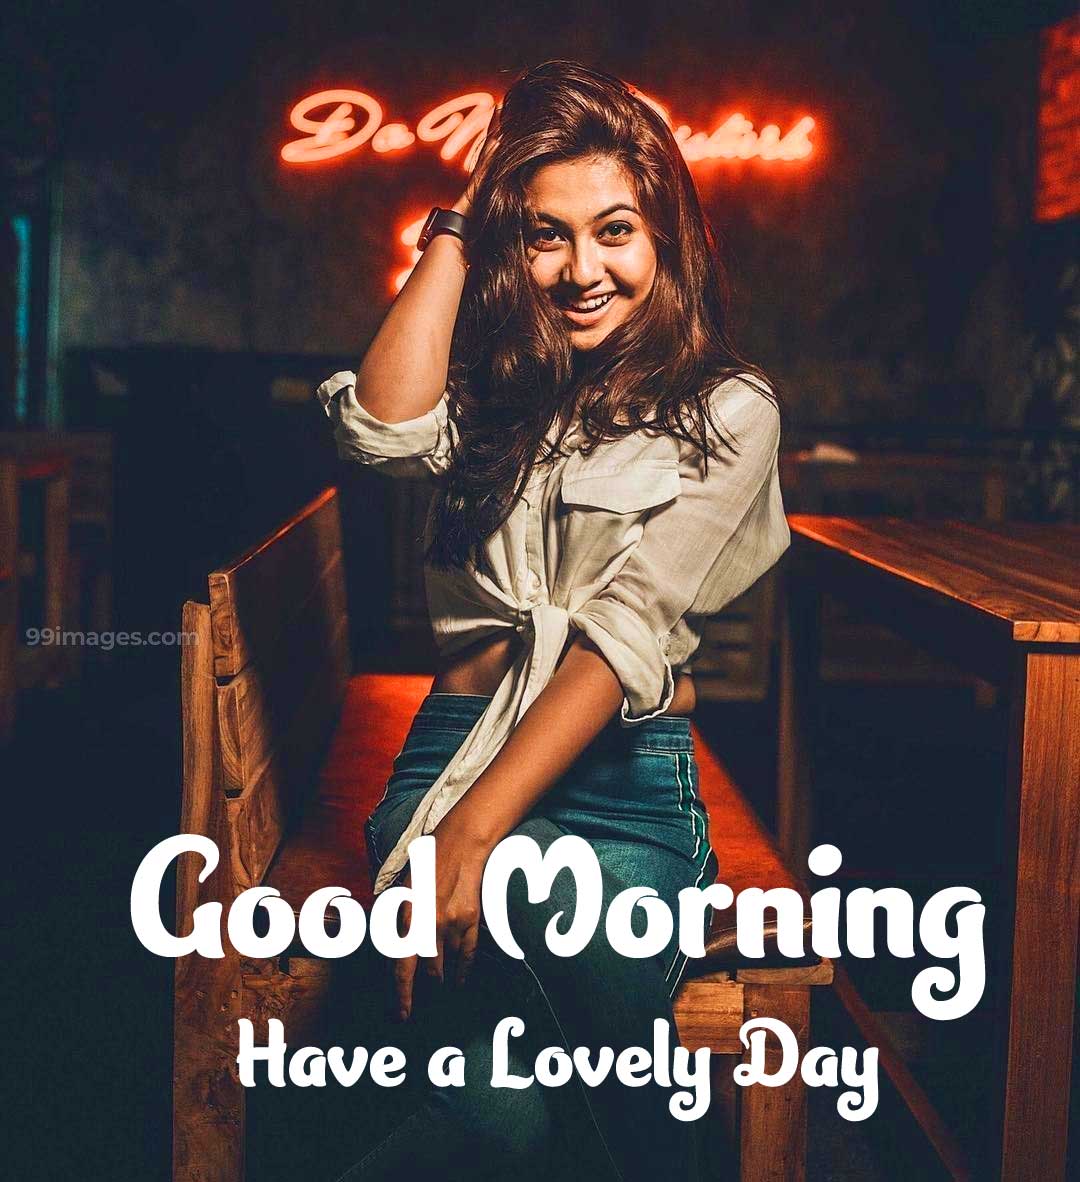 New Top Free Good Morning Wallpaper Pics pictures Download 